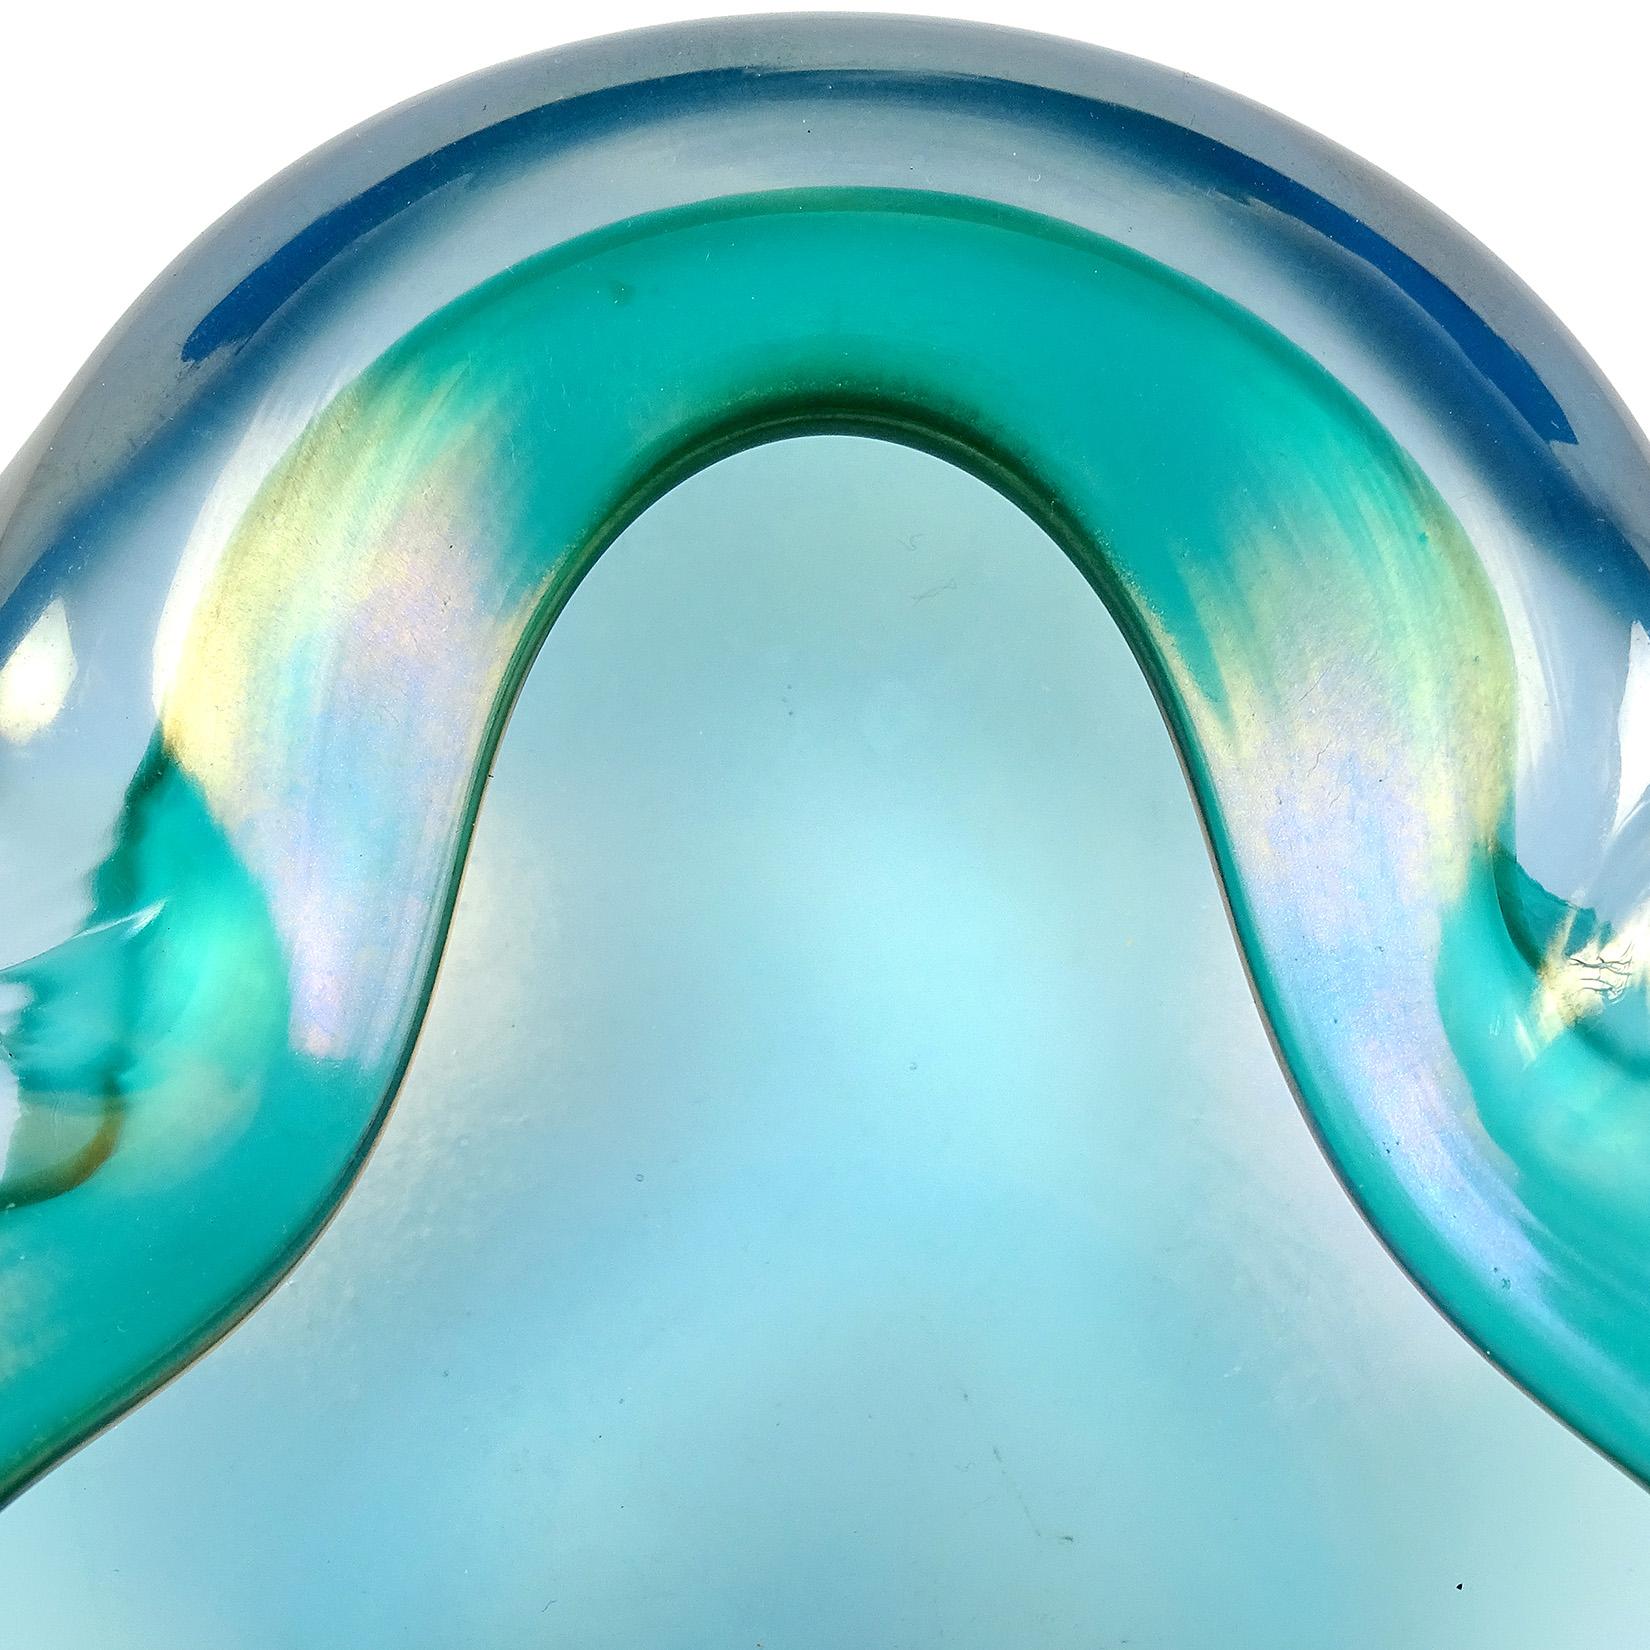 Beautiful vintage Murano hand blown Sommerso iridescent blue green Italian art glass folded over rim bowl / ashtray. Documented to Master glass artist and designer Alfredo Barbini, circa 1950-1960. Published design in his Weil Ceramics and Glass